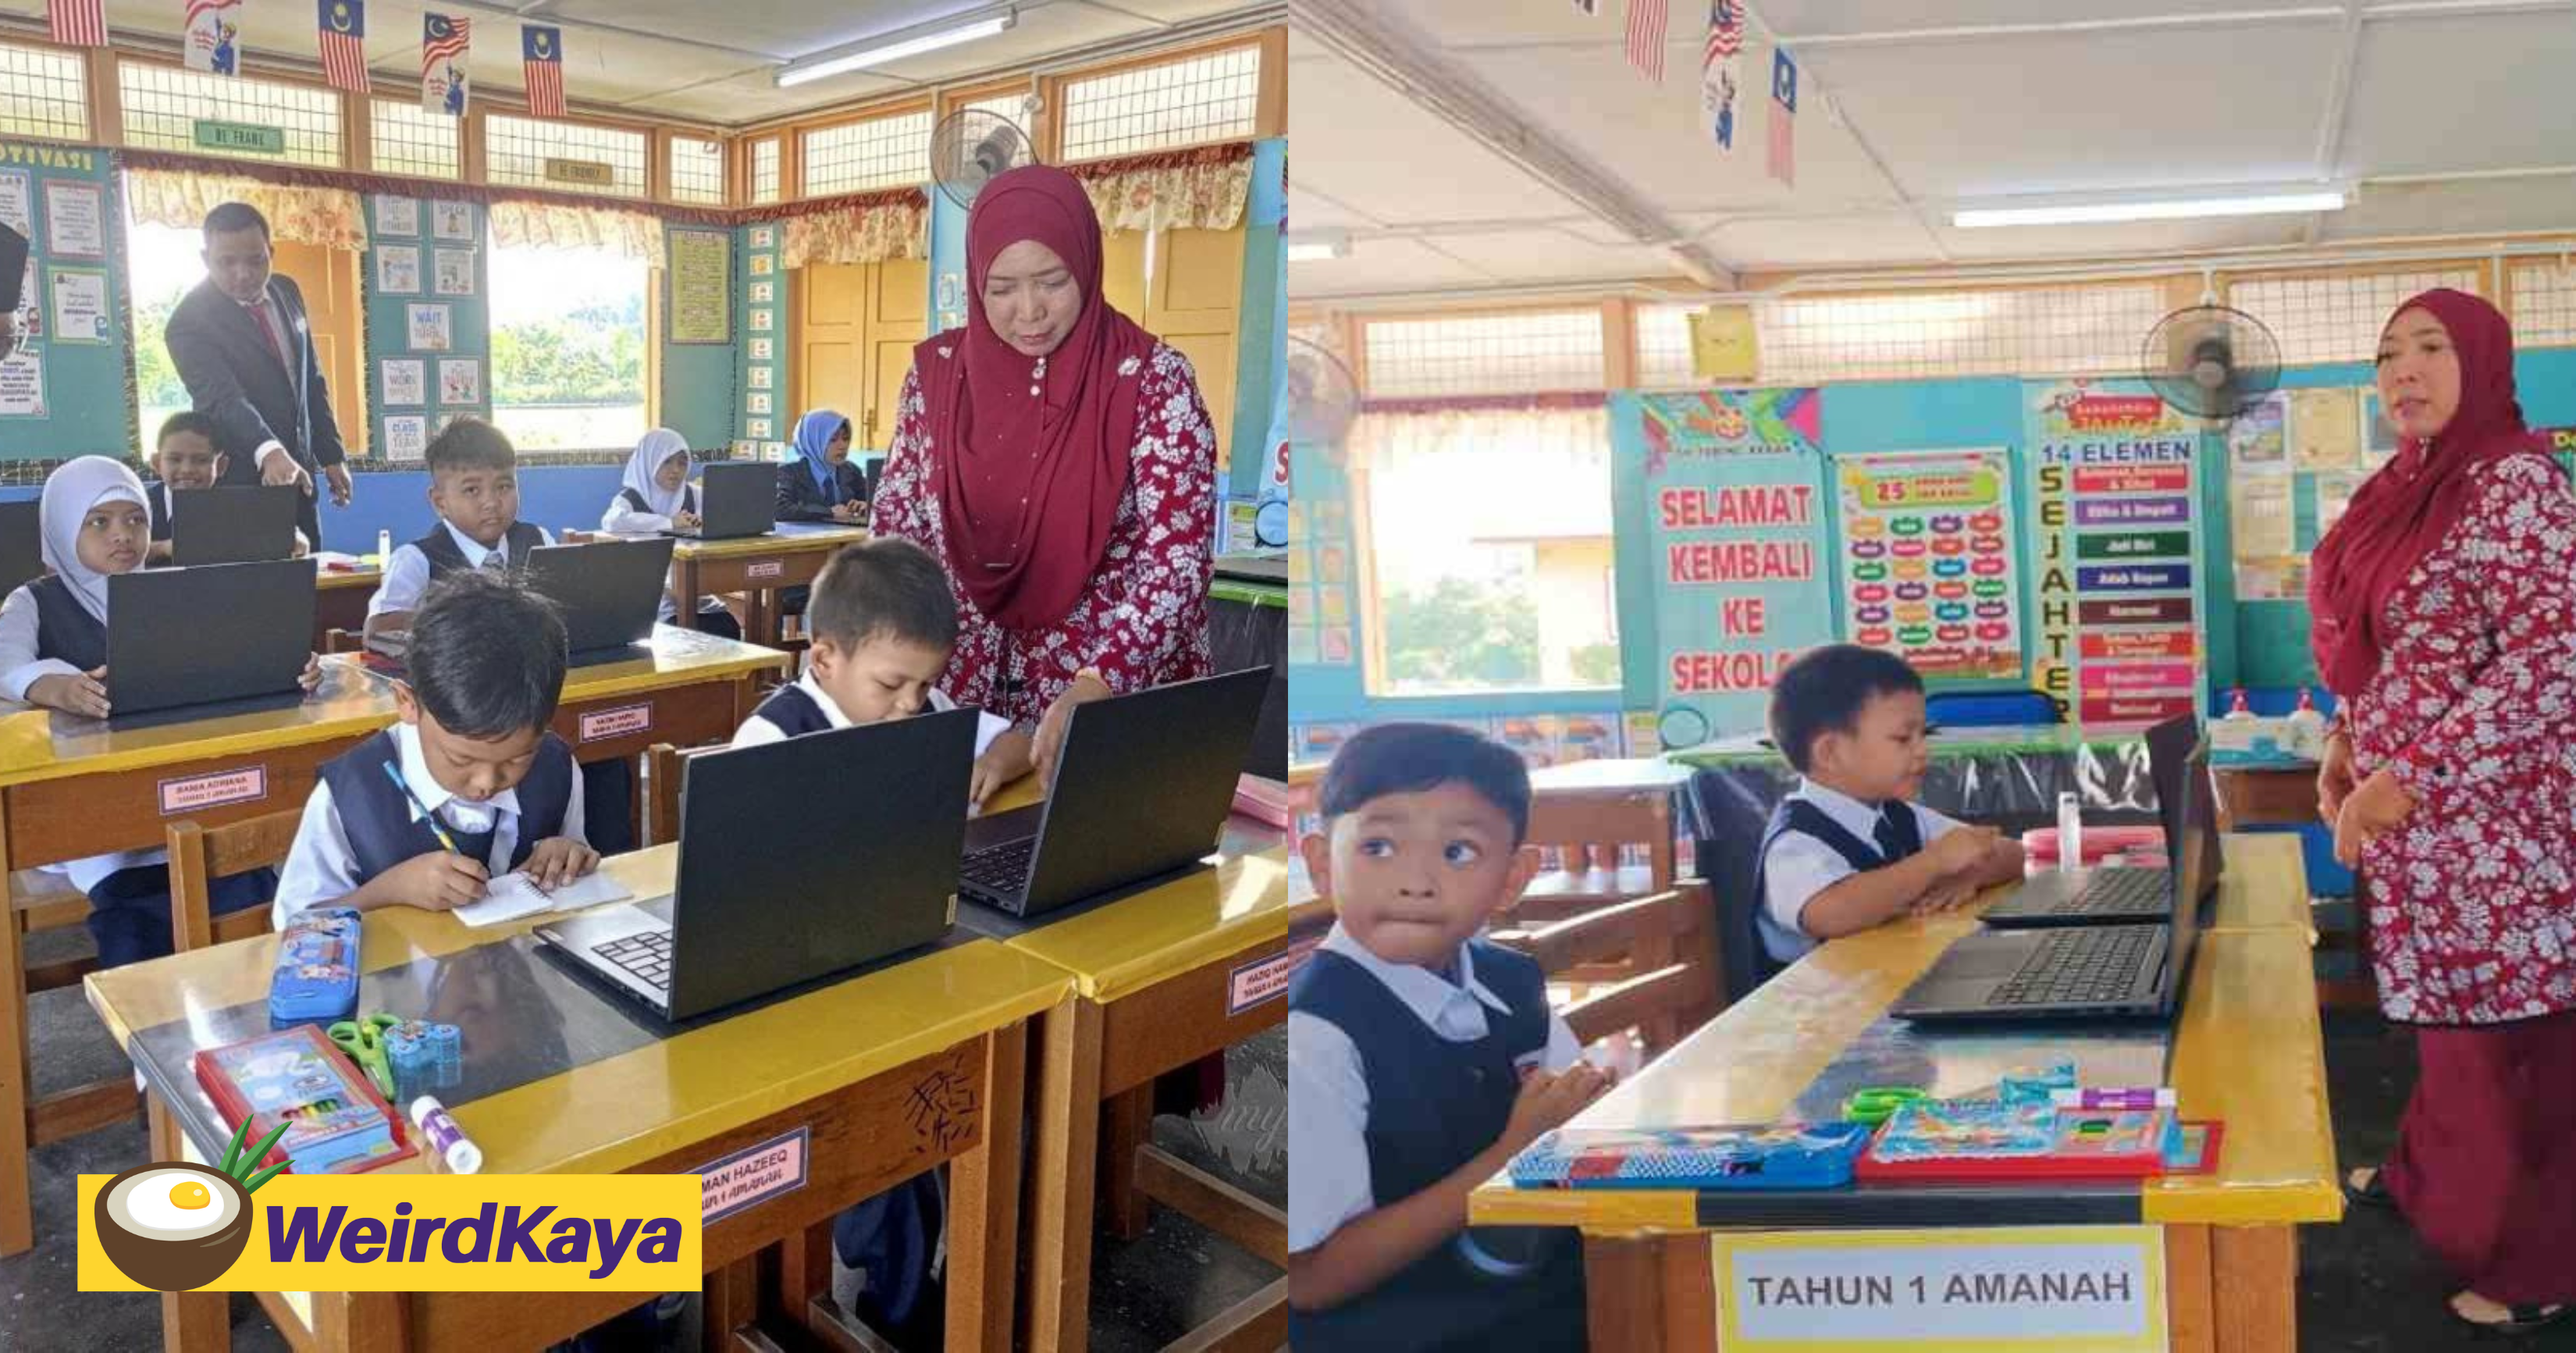 This Primary School In Perak Only Has Two Standard 1 Students For The New School Year